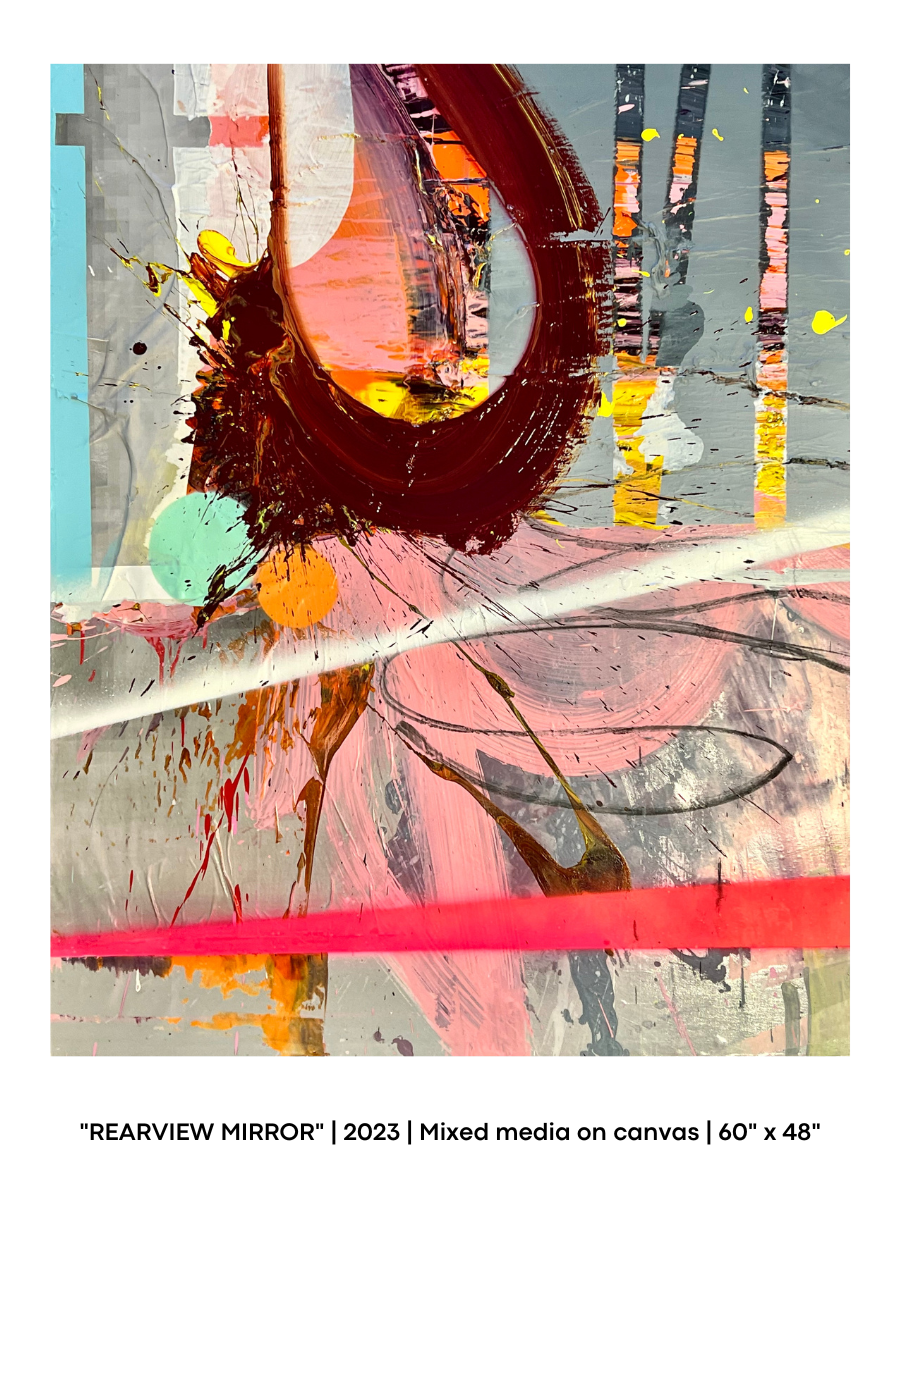 REARVIEW MIRROR 2023 Mixed media on canvas 60 x 48